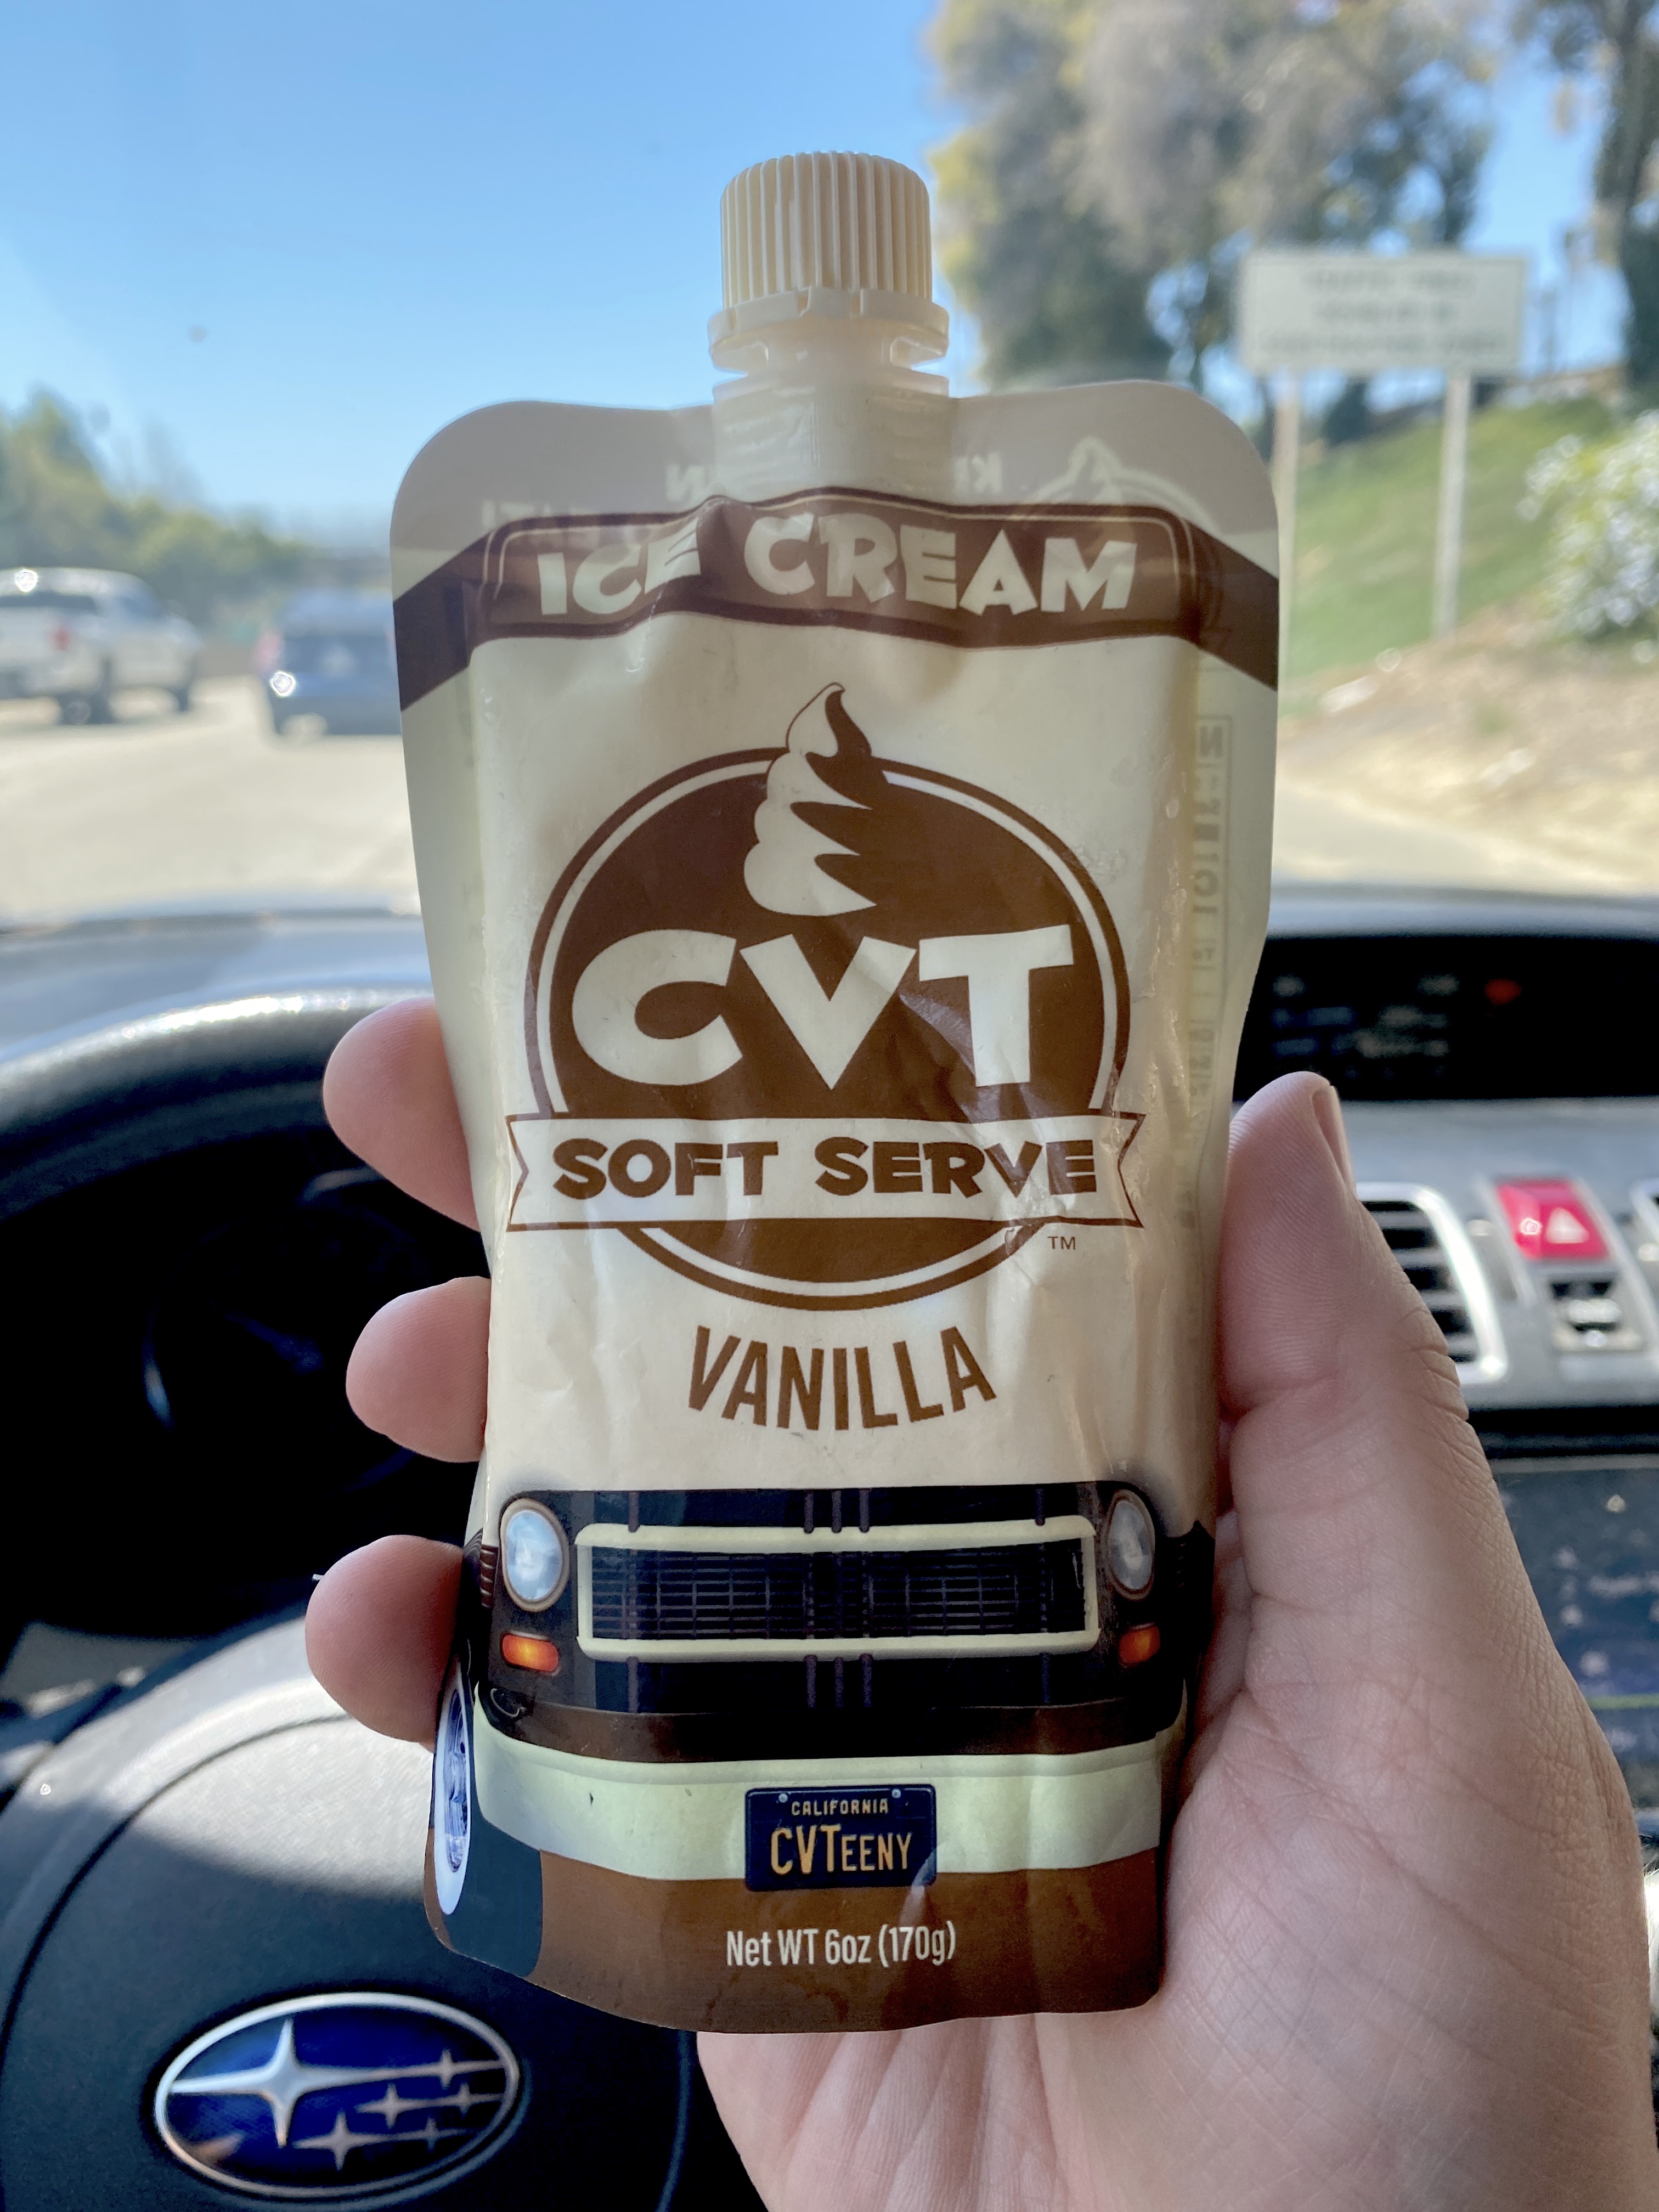 A hand holds a squeeze bag of brown and white soft serve while in a car at daytime.